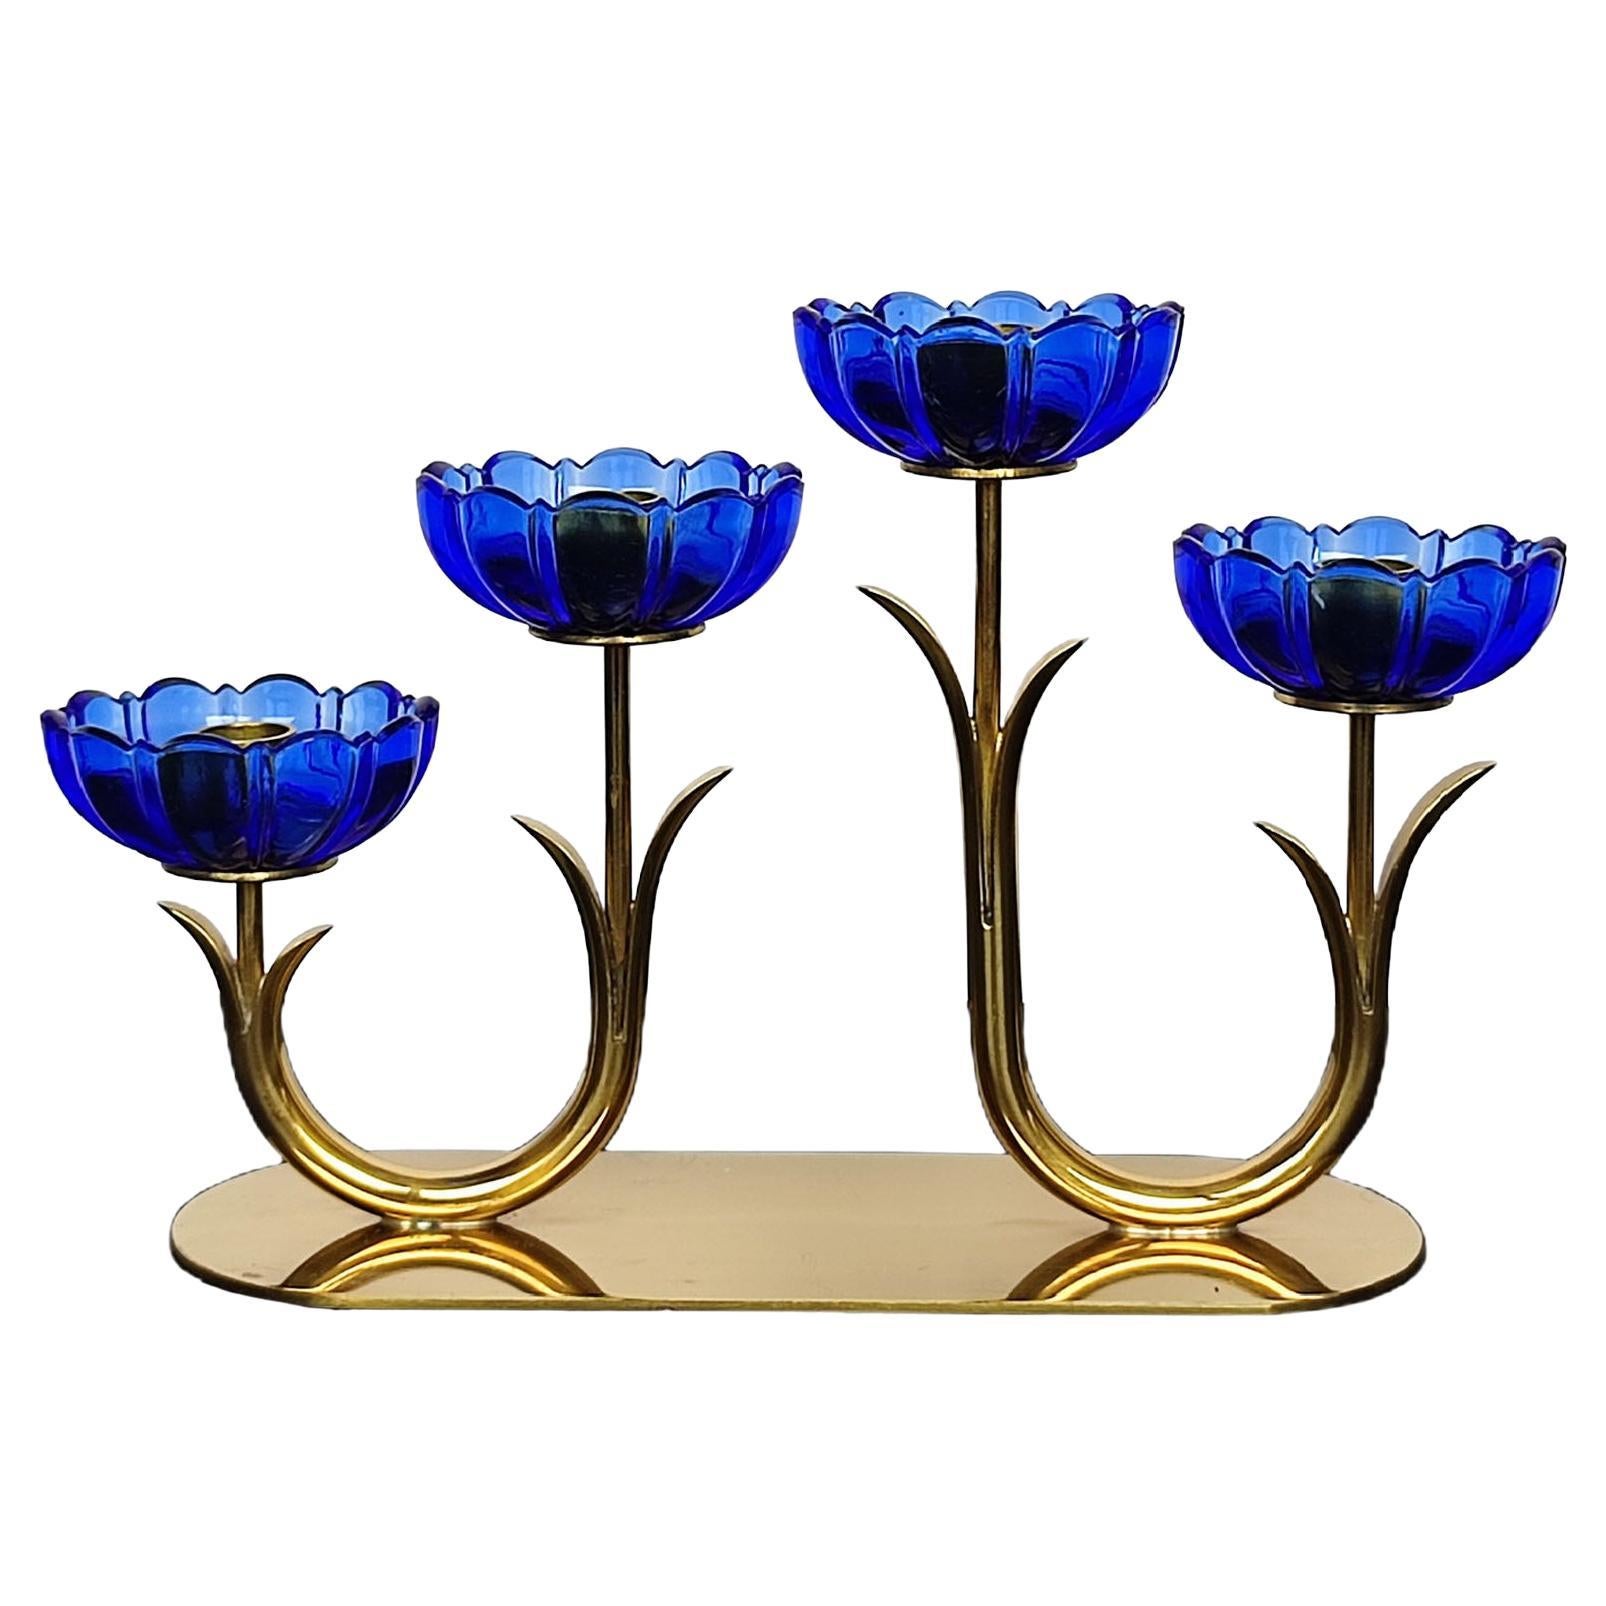 Gunnar Ander for Ystad Metall, Candlestick in Brass and Blue Art Glass For Sale